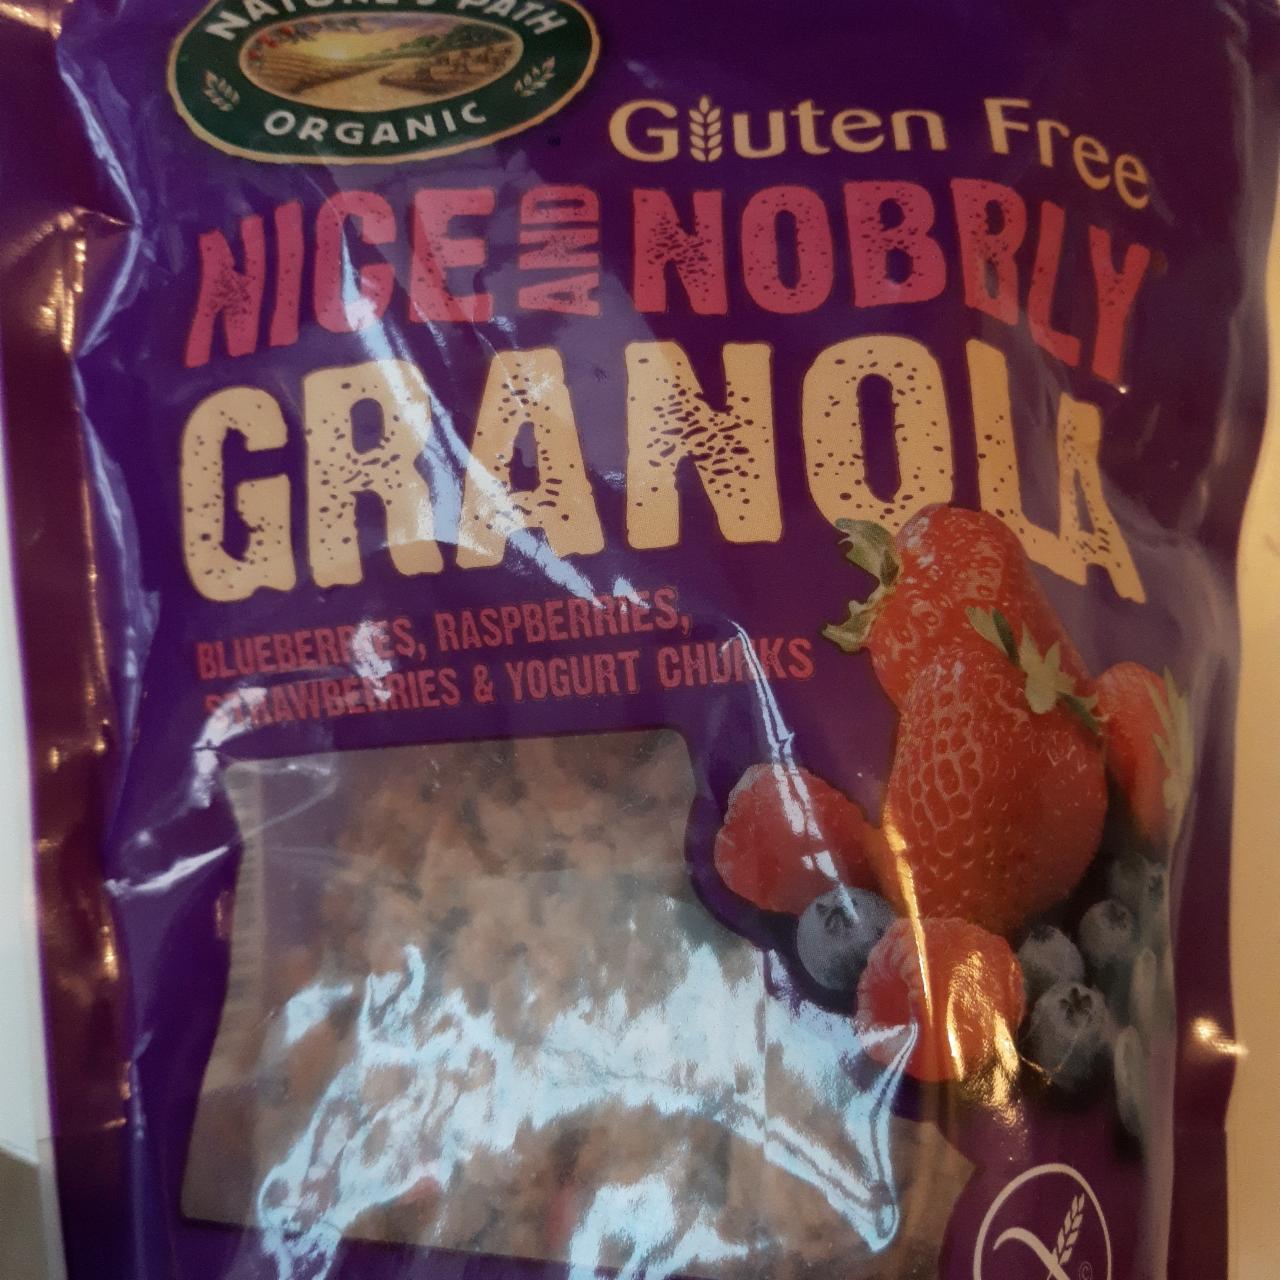 Fotografie - Organic Nice and nobbly Granola gluten free Nature's Path